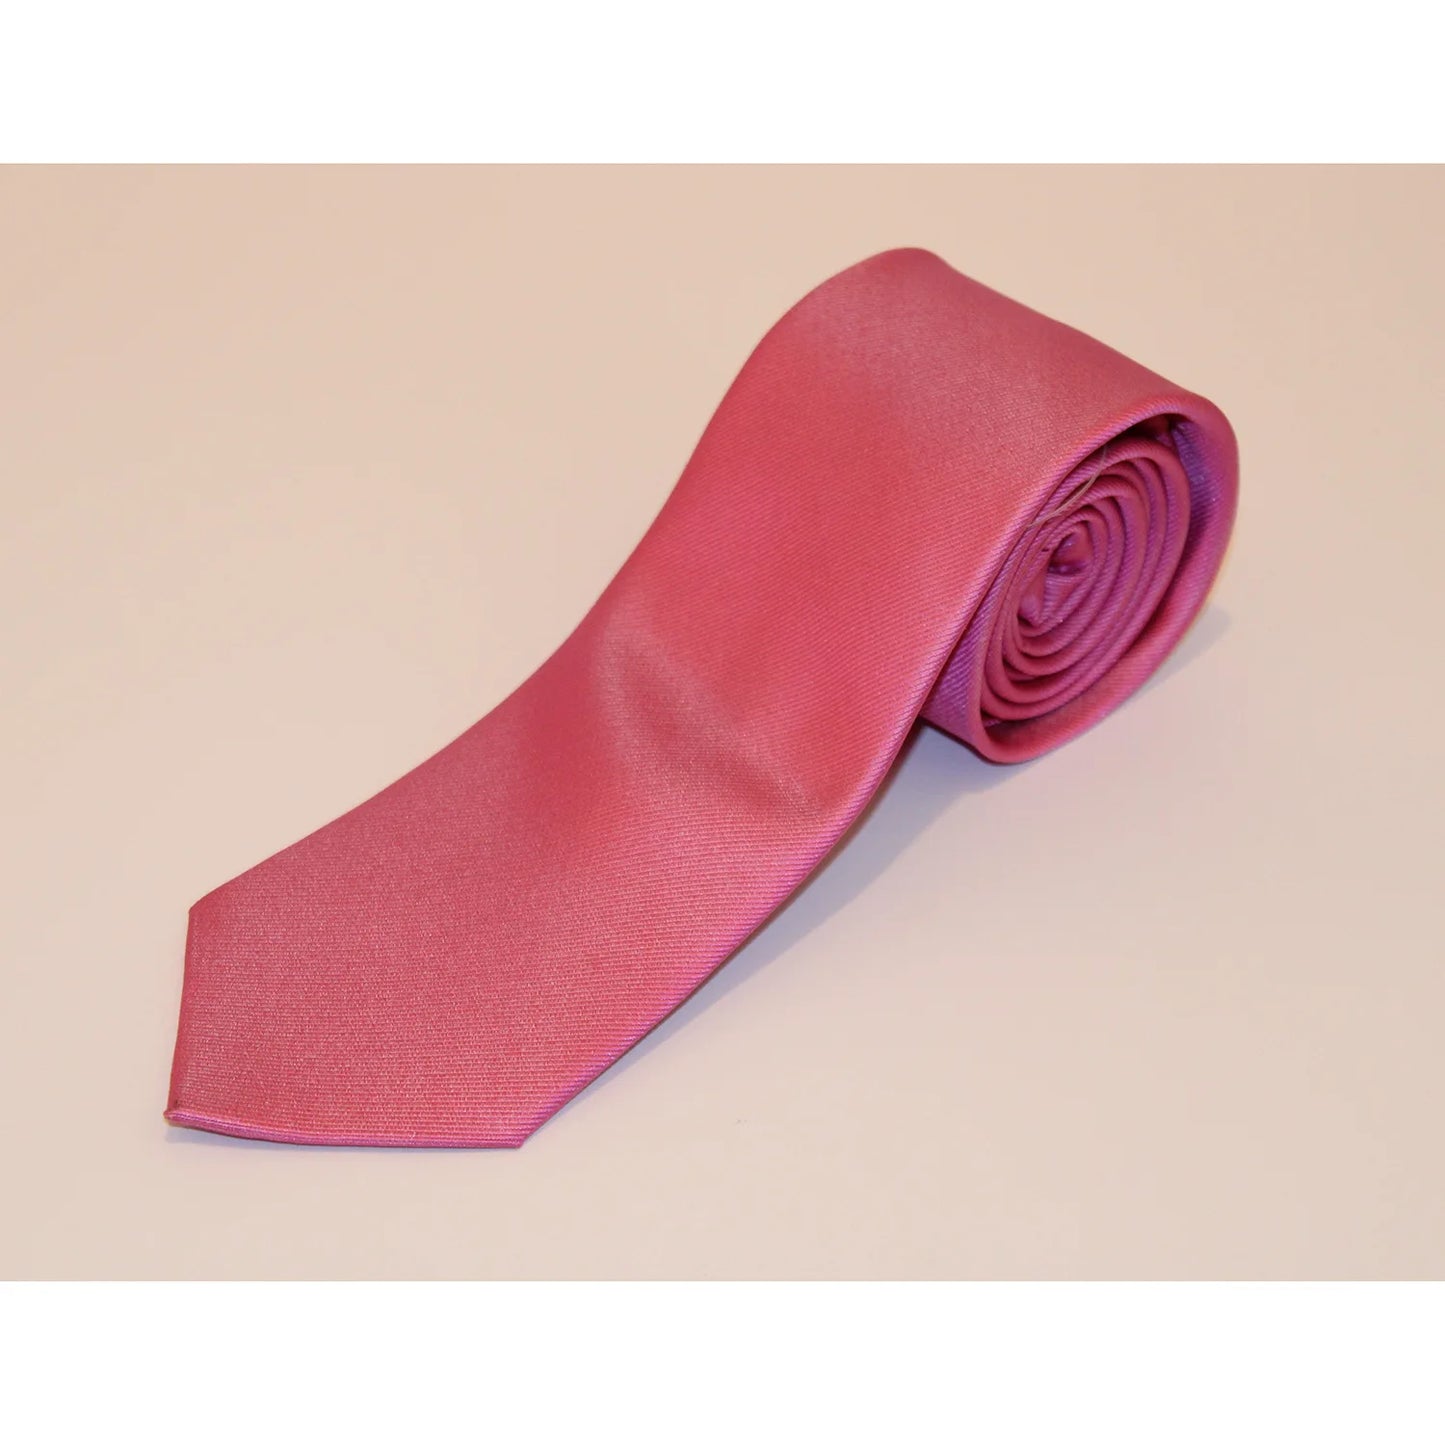 The Shirt Shop Tall Tie - Solid Dark Pink